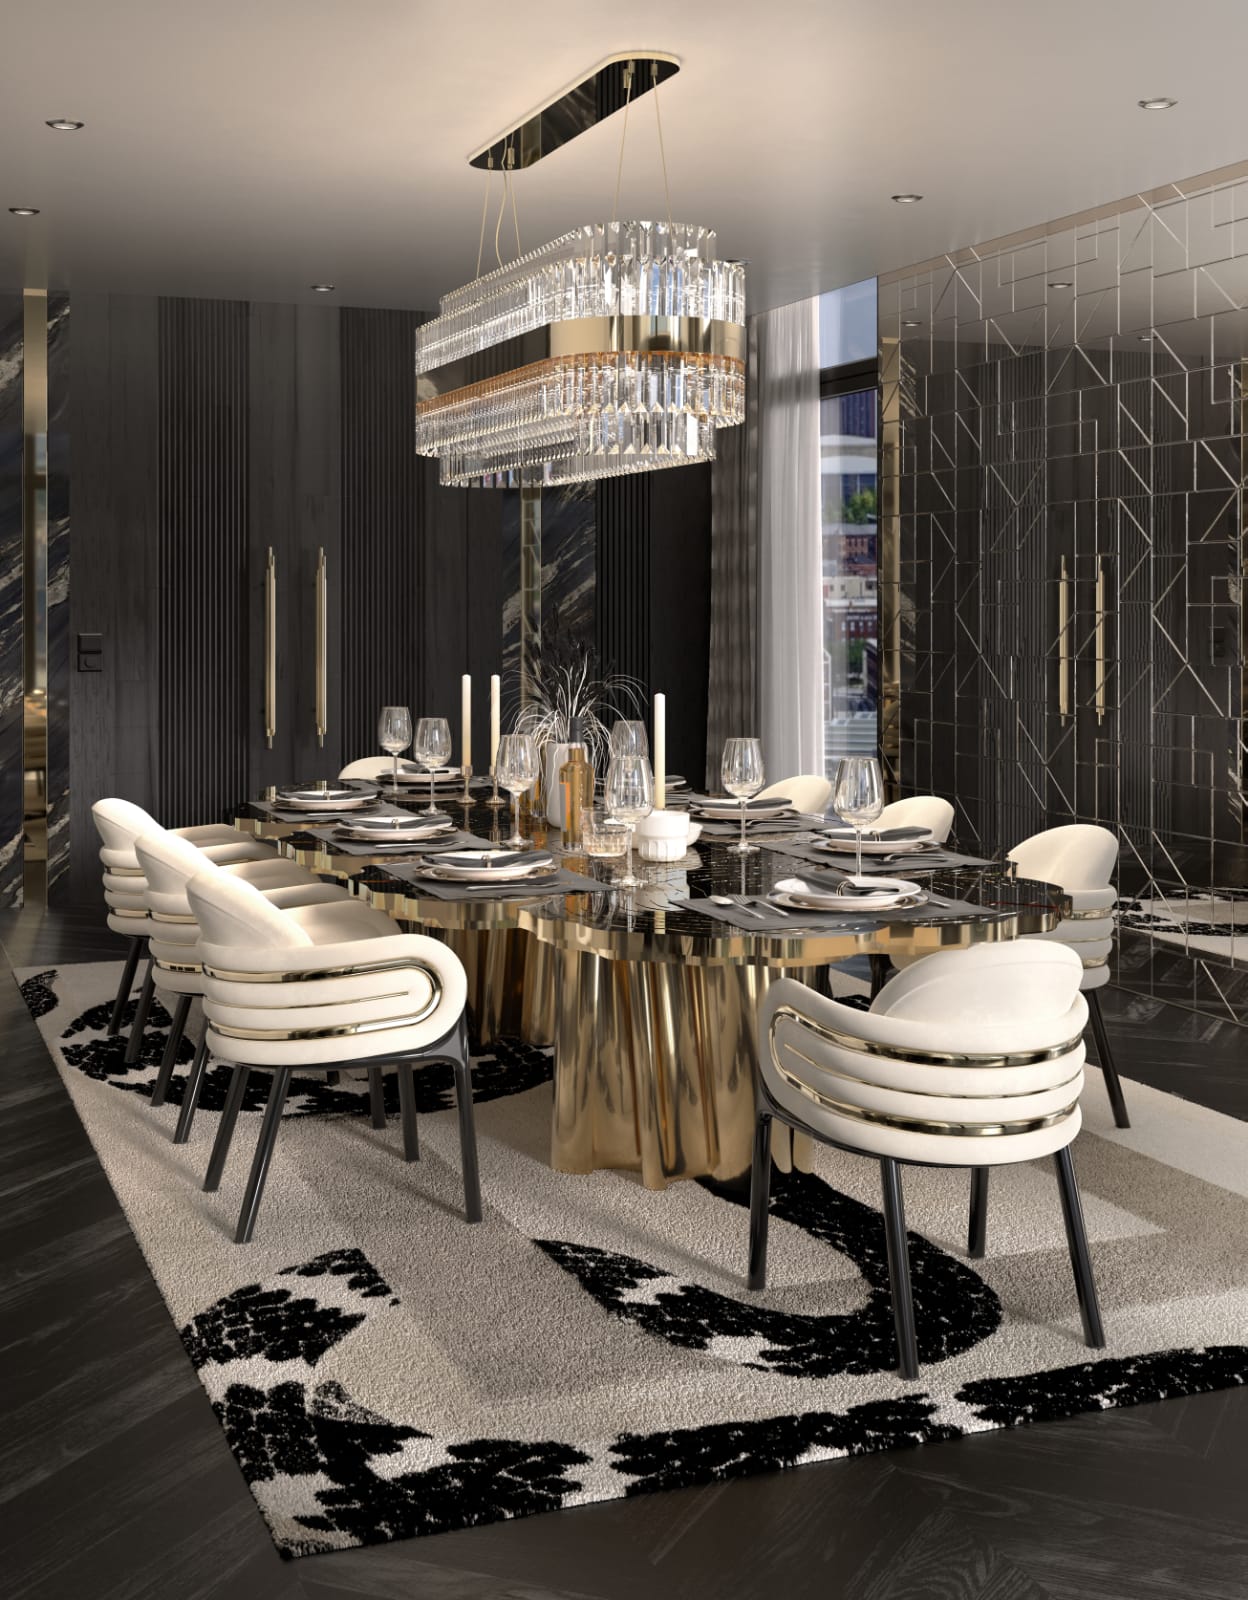 LUXURY DINING ROOM WITH GOLD